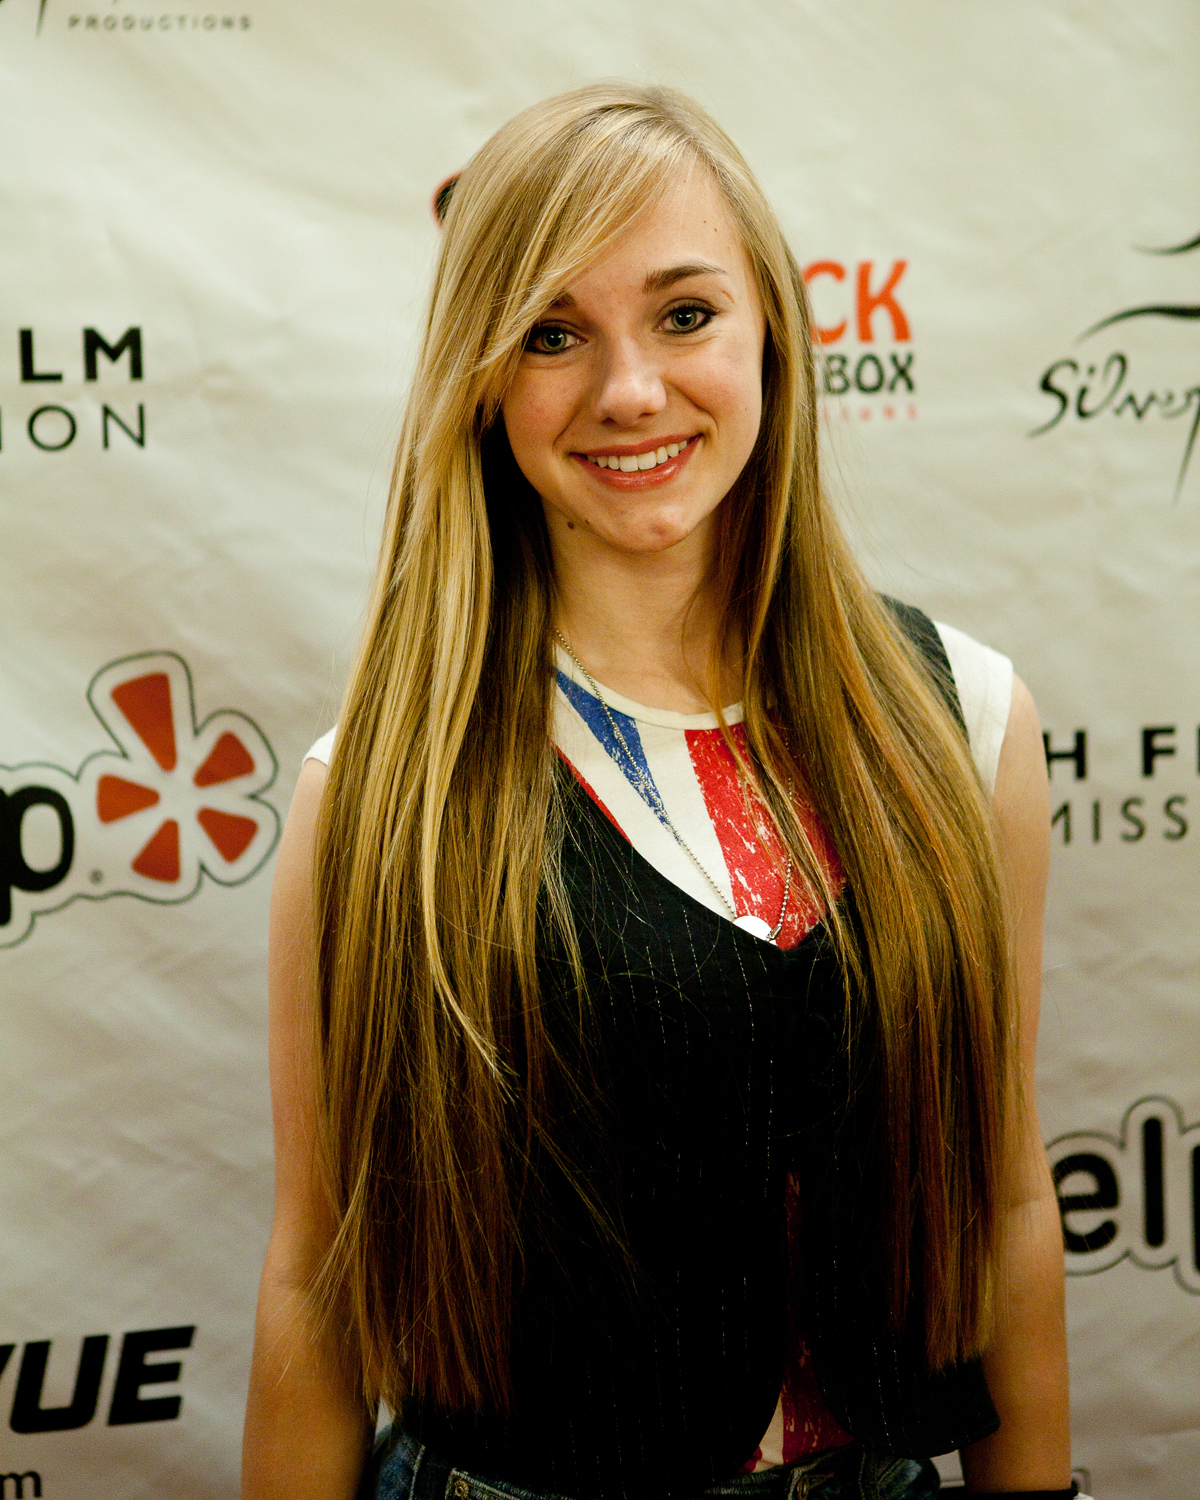 Stefania Barr at the WLSS Film Festival where Life According to Penny won 2 awards.